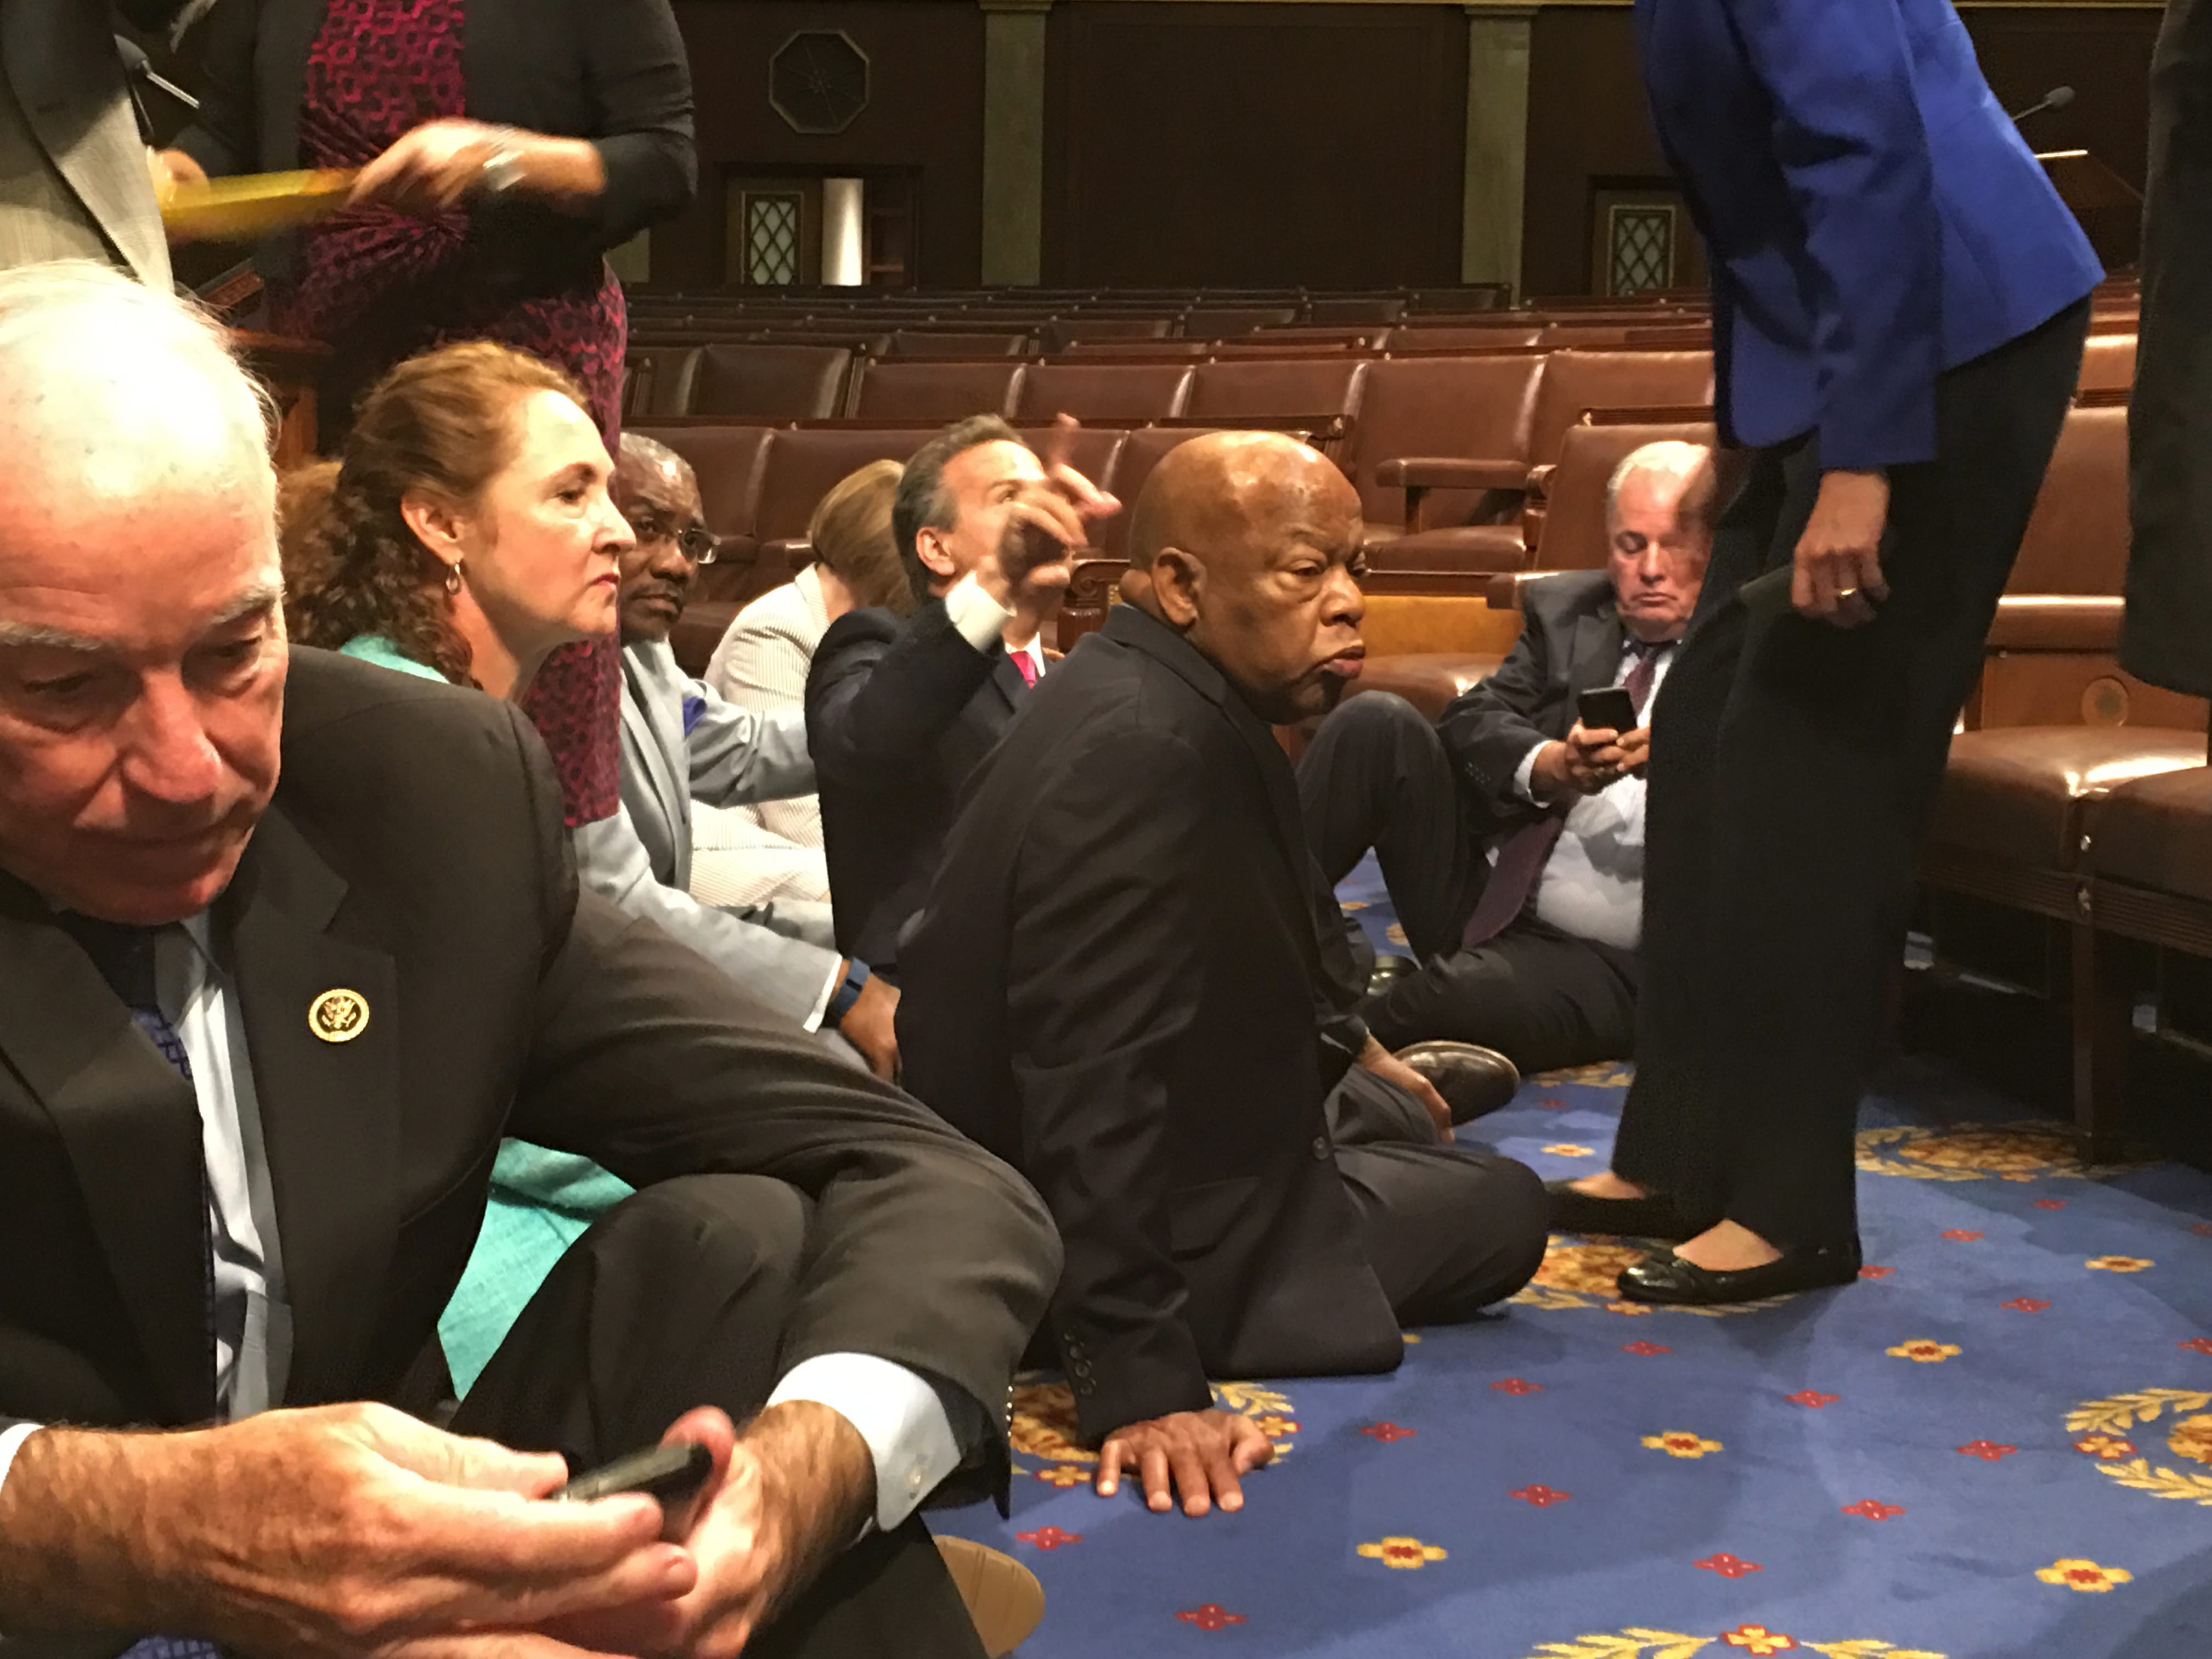 This photo provided by Rep. John Yarmuth, D-Ky., shows Democrat members of Congress, including Rep. John Lewis, D-Ga., center, and Rep. Joe Courtney, D-Conn., left, participate in sit-down protest seeking a a vote on gun control measures, Wednesday, June 22, 2016, on the floor of the House on Capitol Hill in Washington. (Rep.